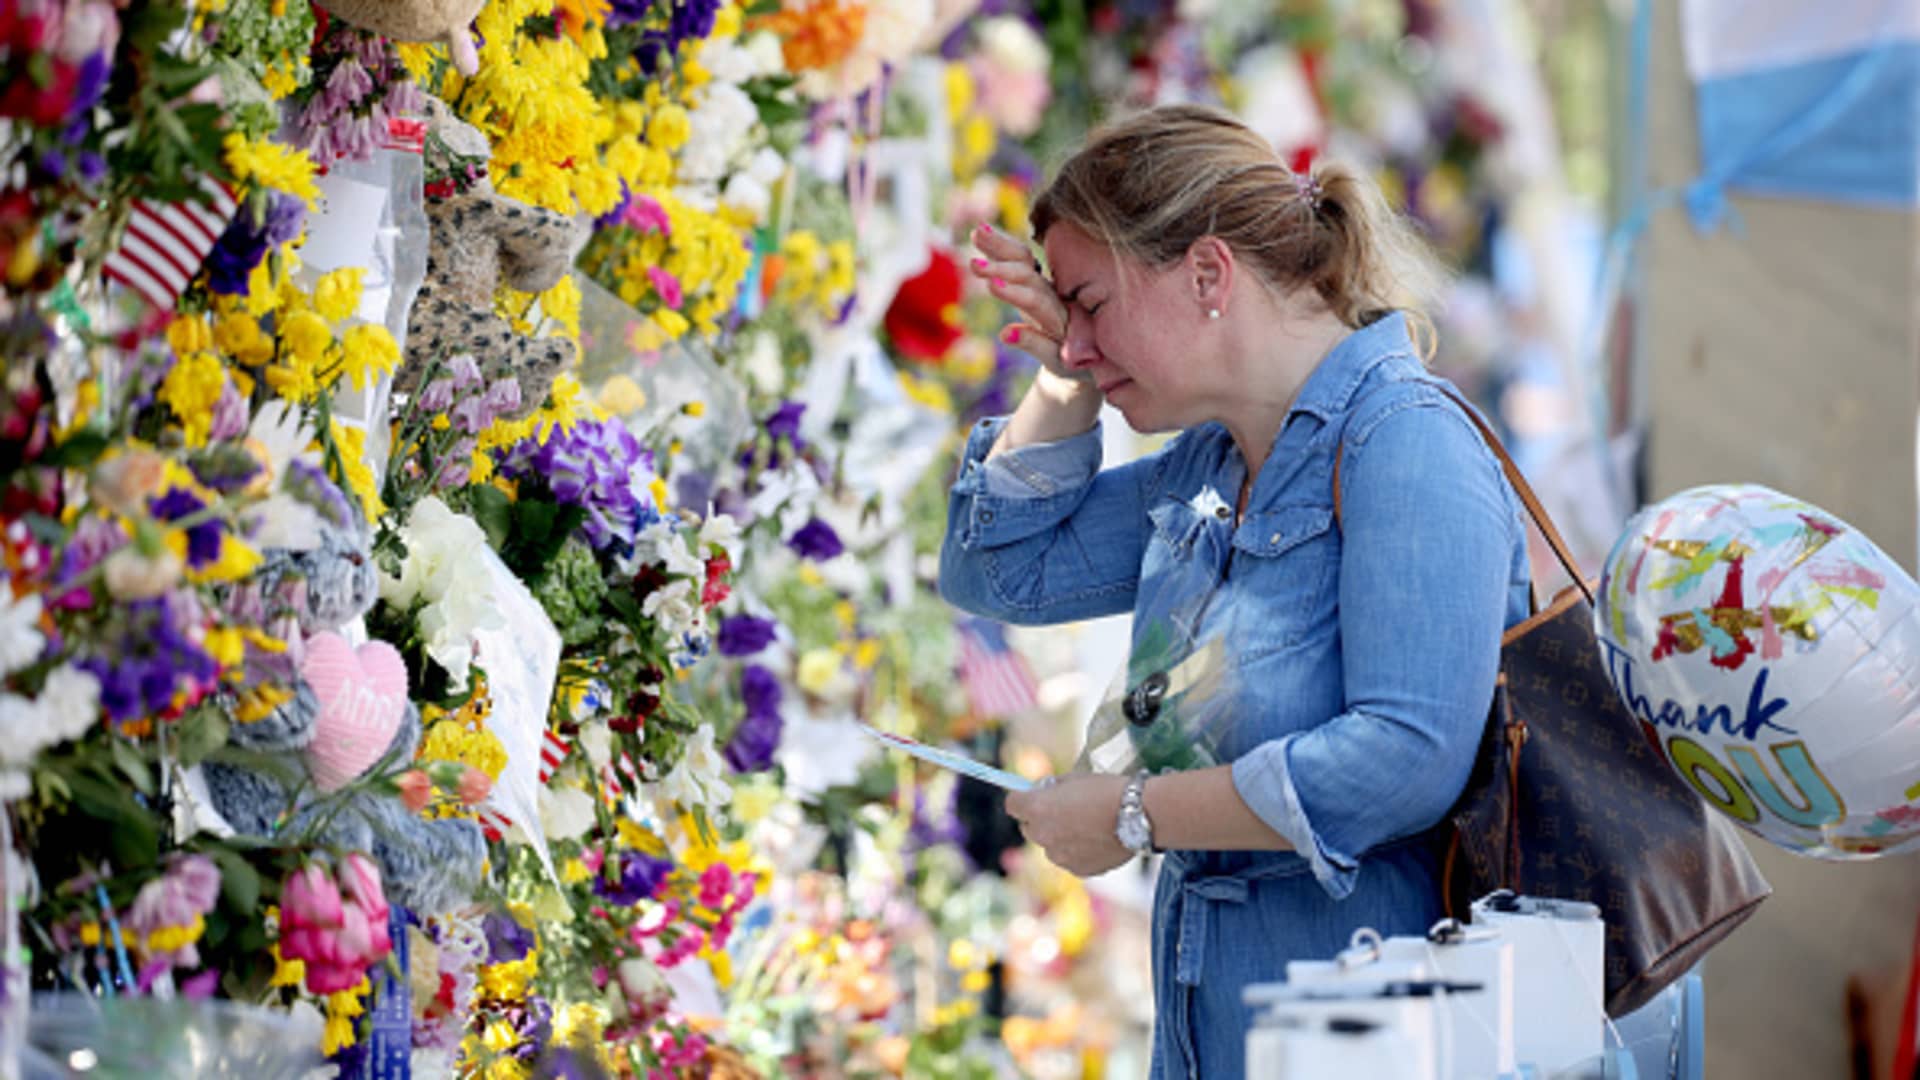 Laura Solla weeps as she places flowers near the memorial site for victims of the collapsed 12-story Champlain Towers South condo building on July 08, 2021 in Surfside, Florida.